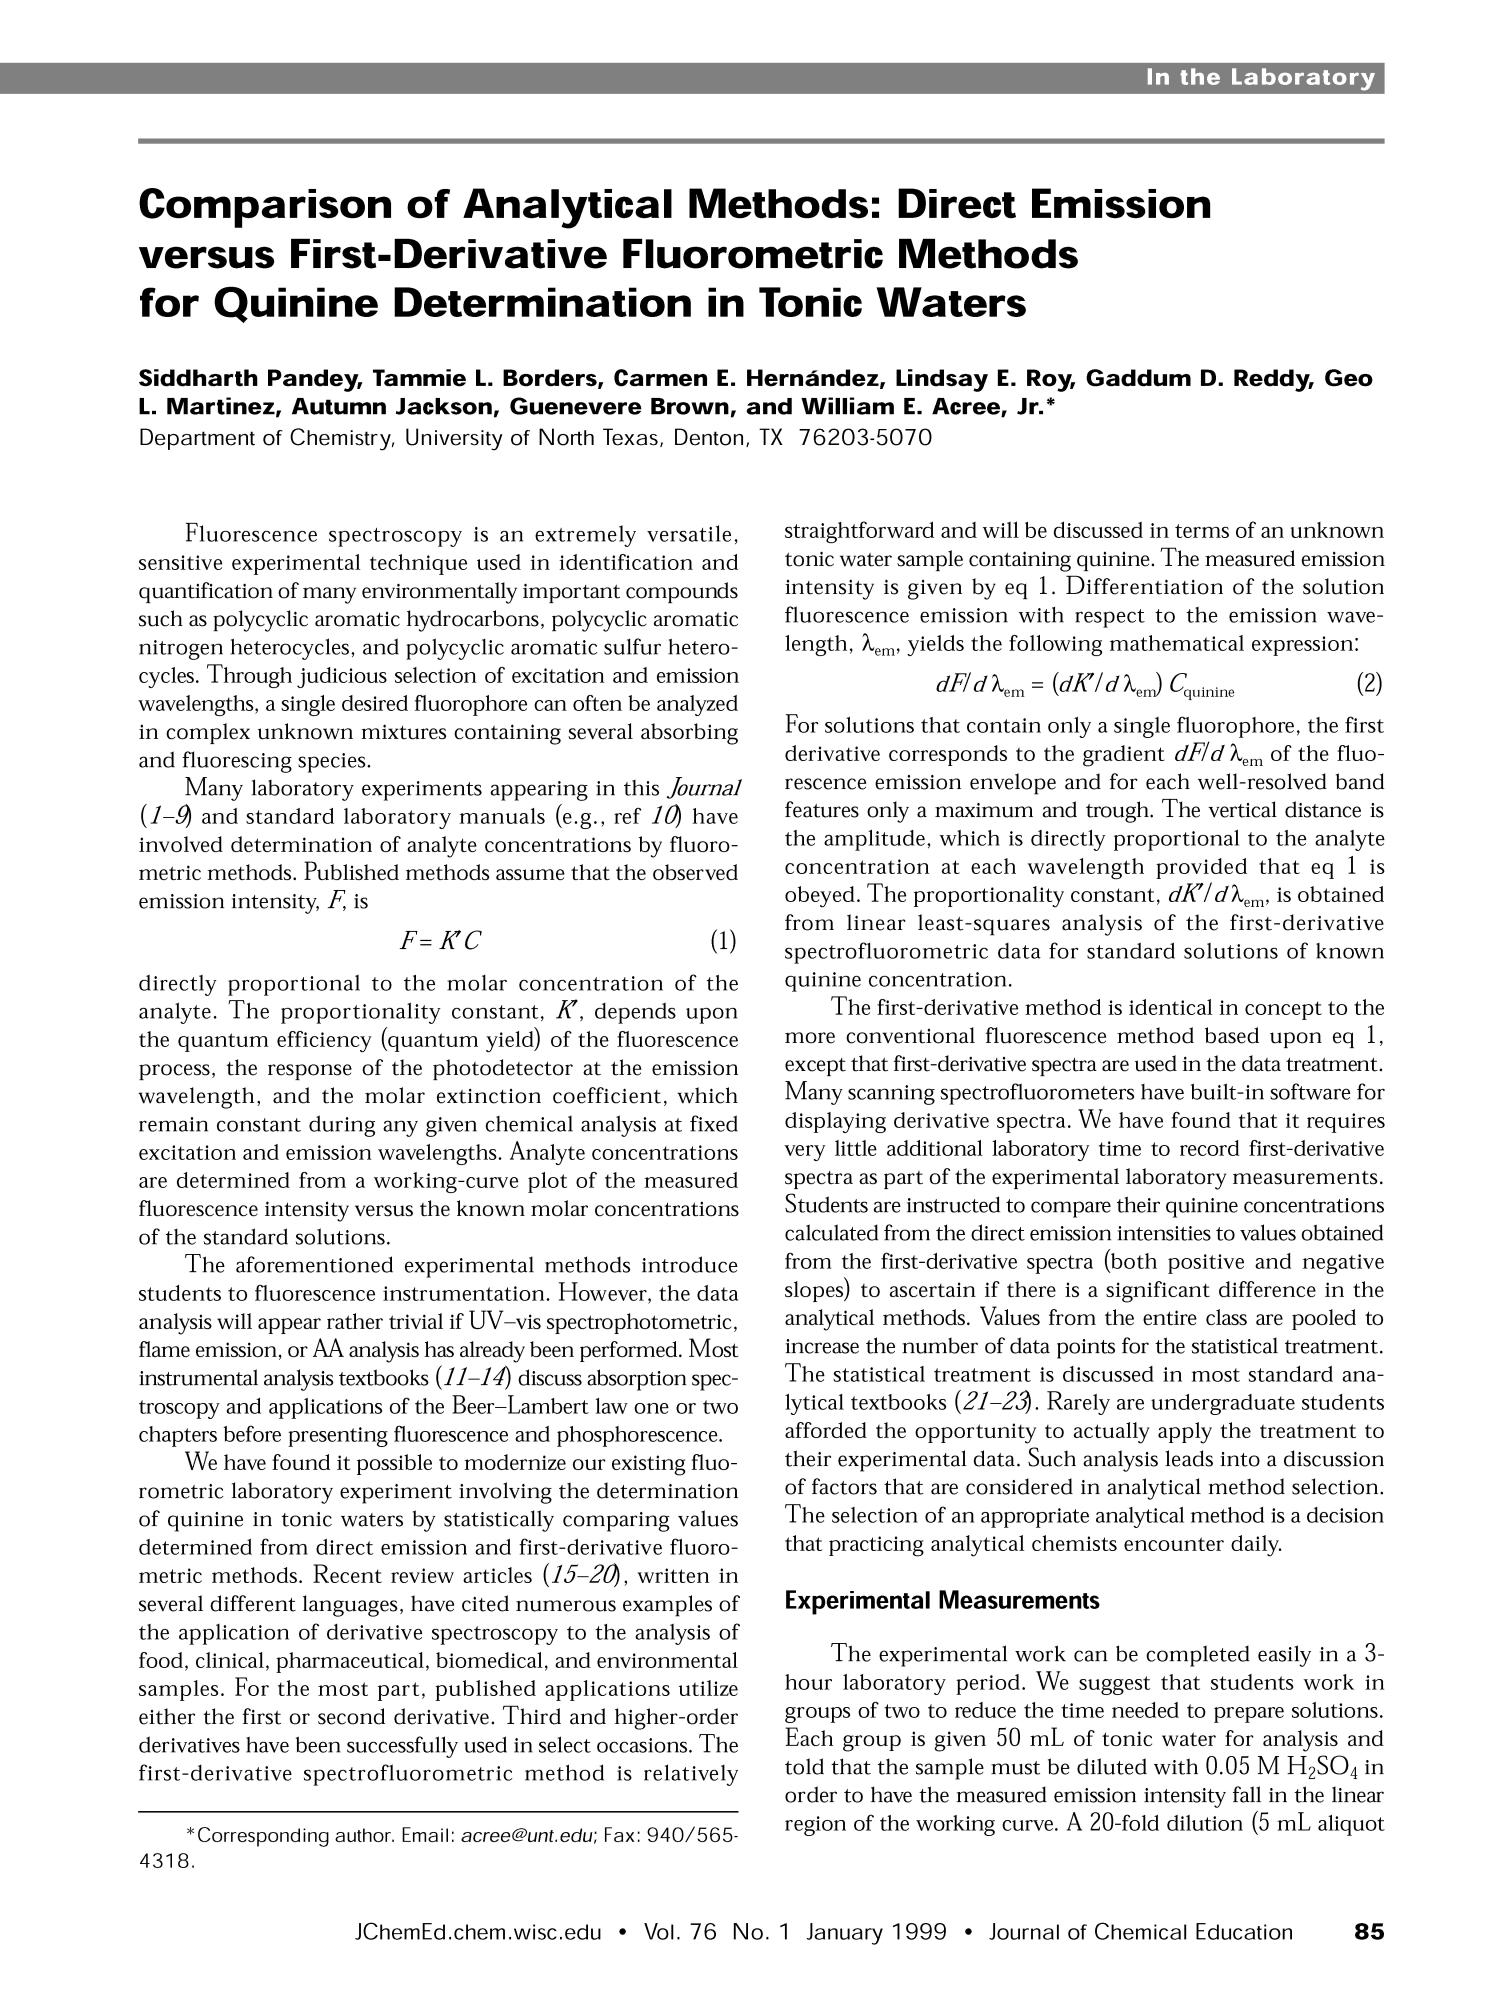 Comparison of Analytical Methods: Direct Emission versus First-Derivative Fluorometric Methods for Quinine Determination in Tonic Waters
                                                
                                                    [Sequence #]: 1 of 3
                                                